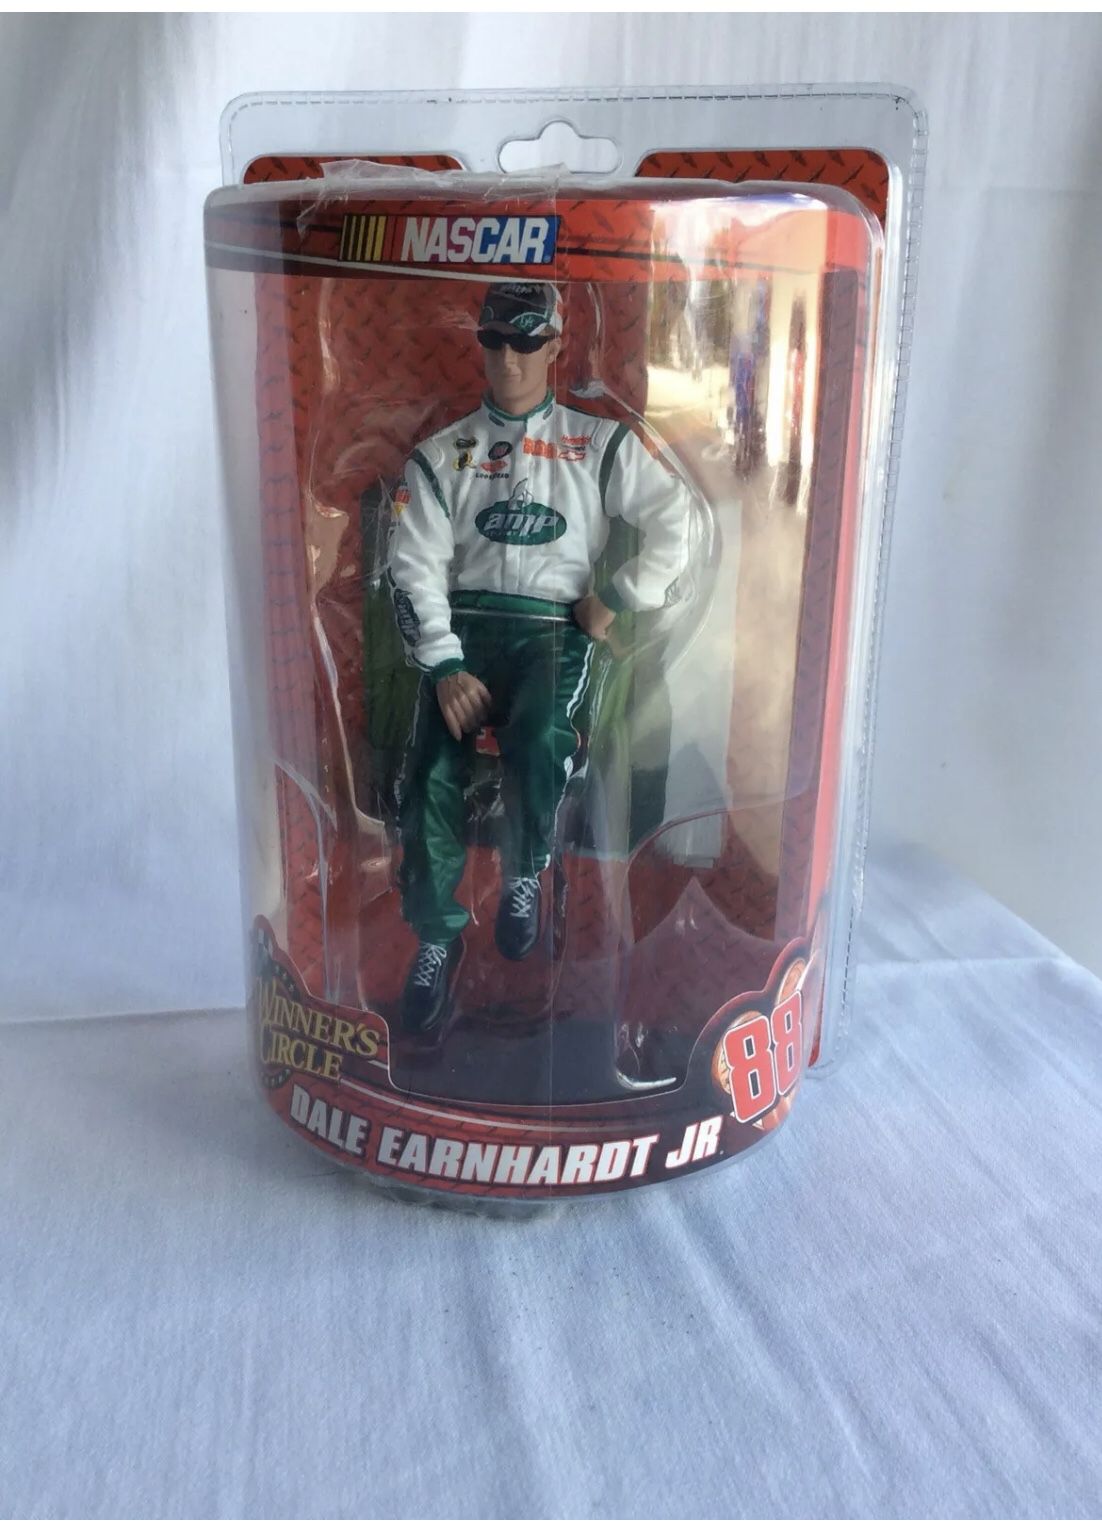 Dale Earnhardt Jr #88 Collectable Action Figure Winners Circle NASCAR Drivers